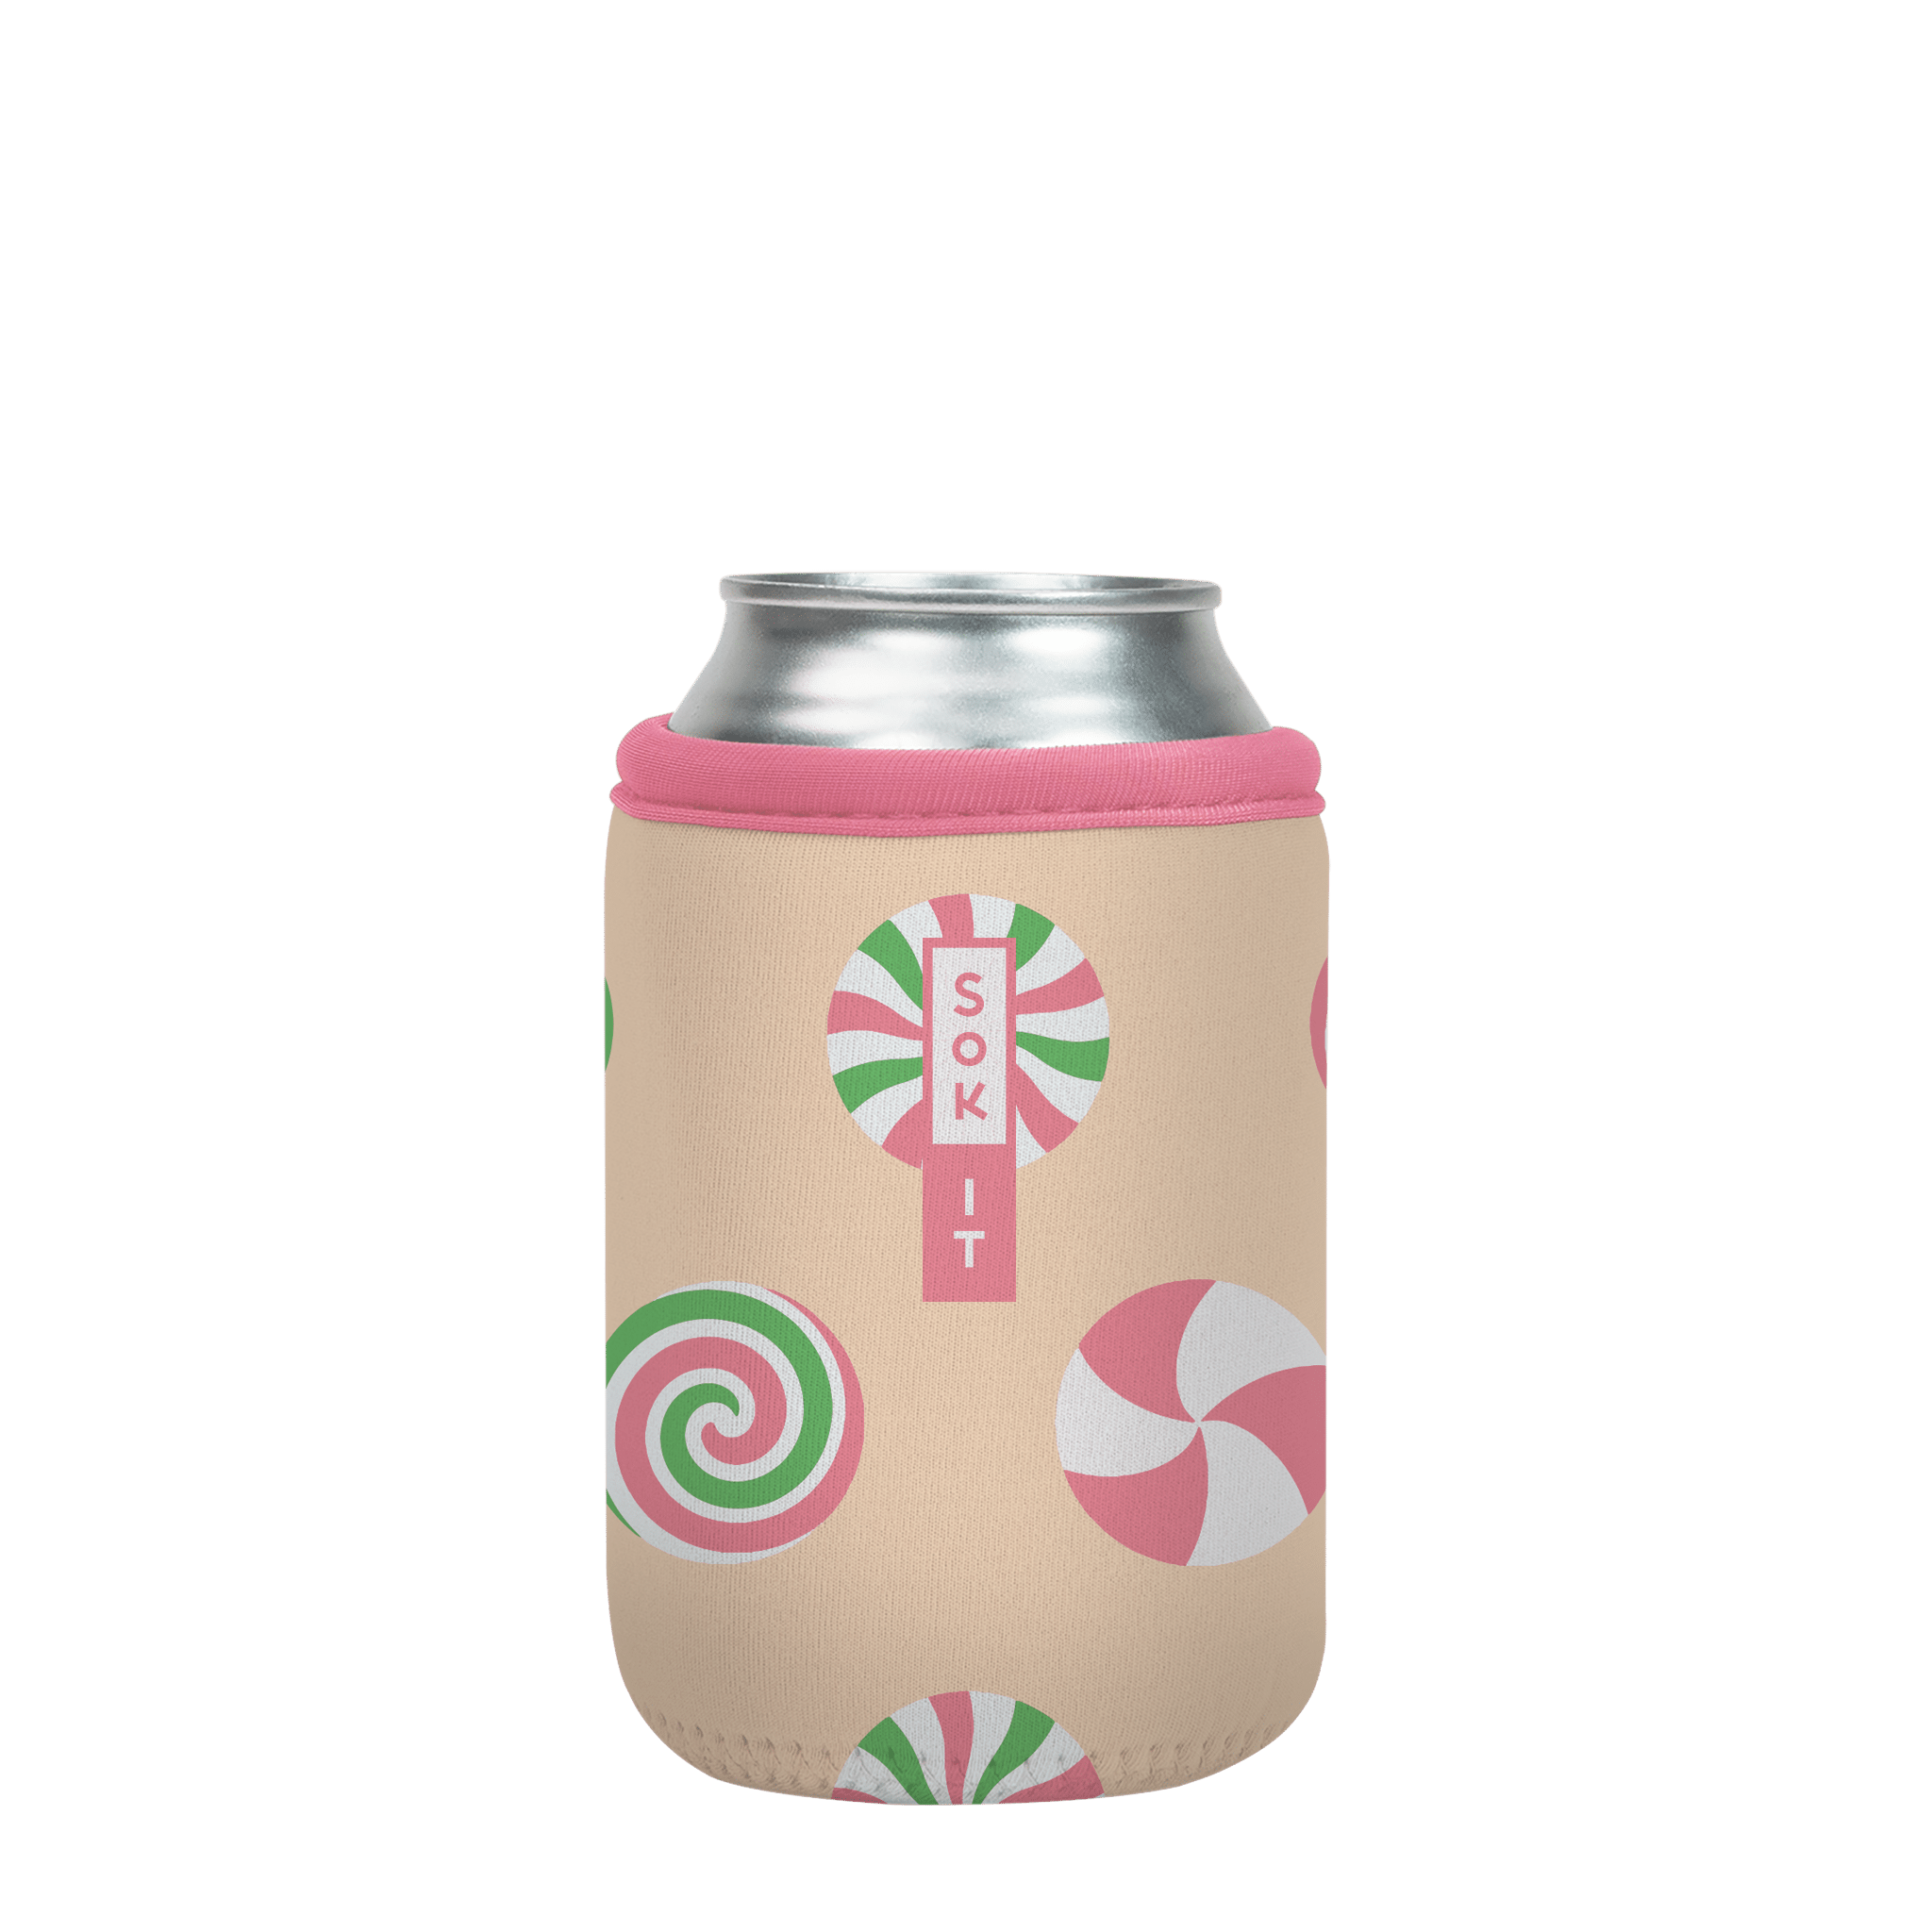 CanSok Candy Lane 12oz Can